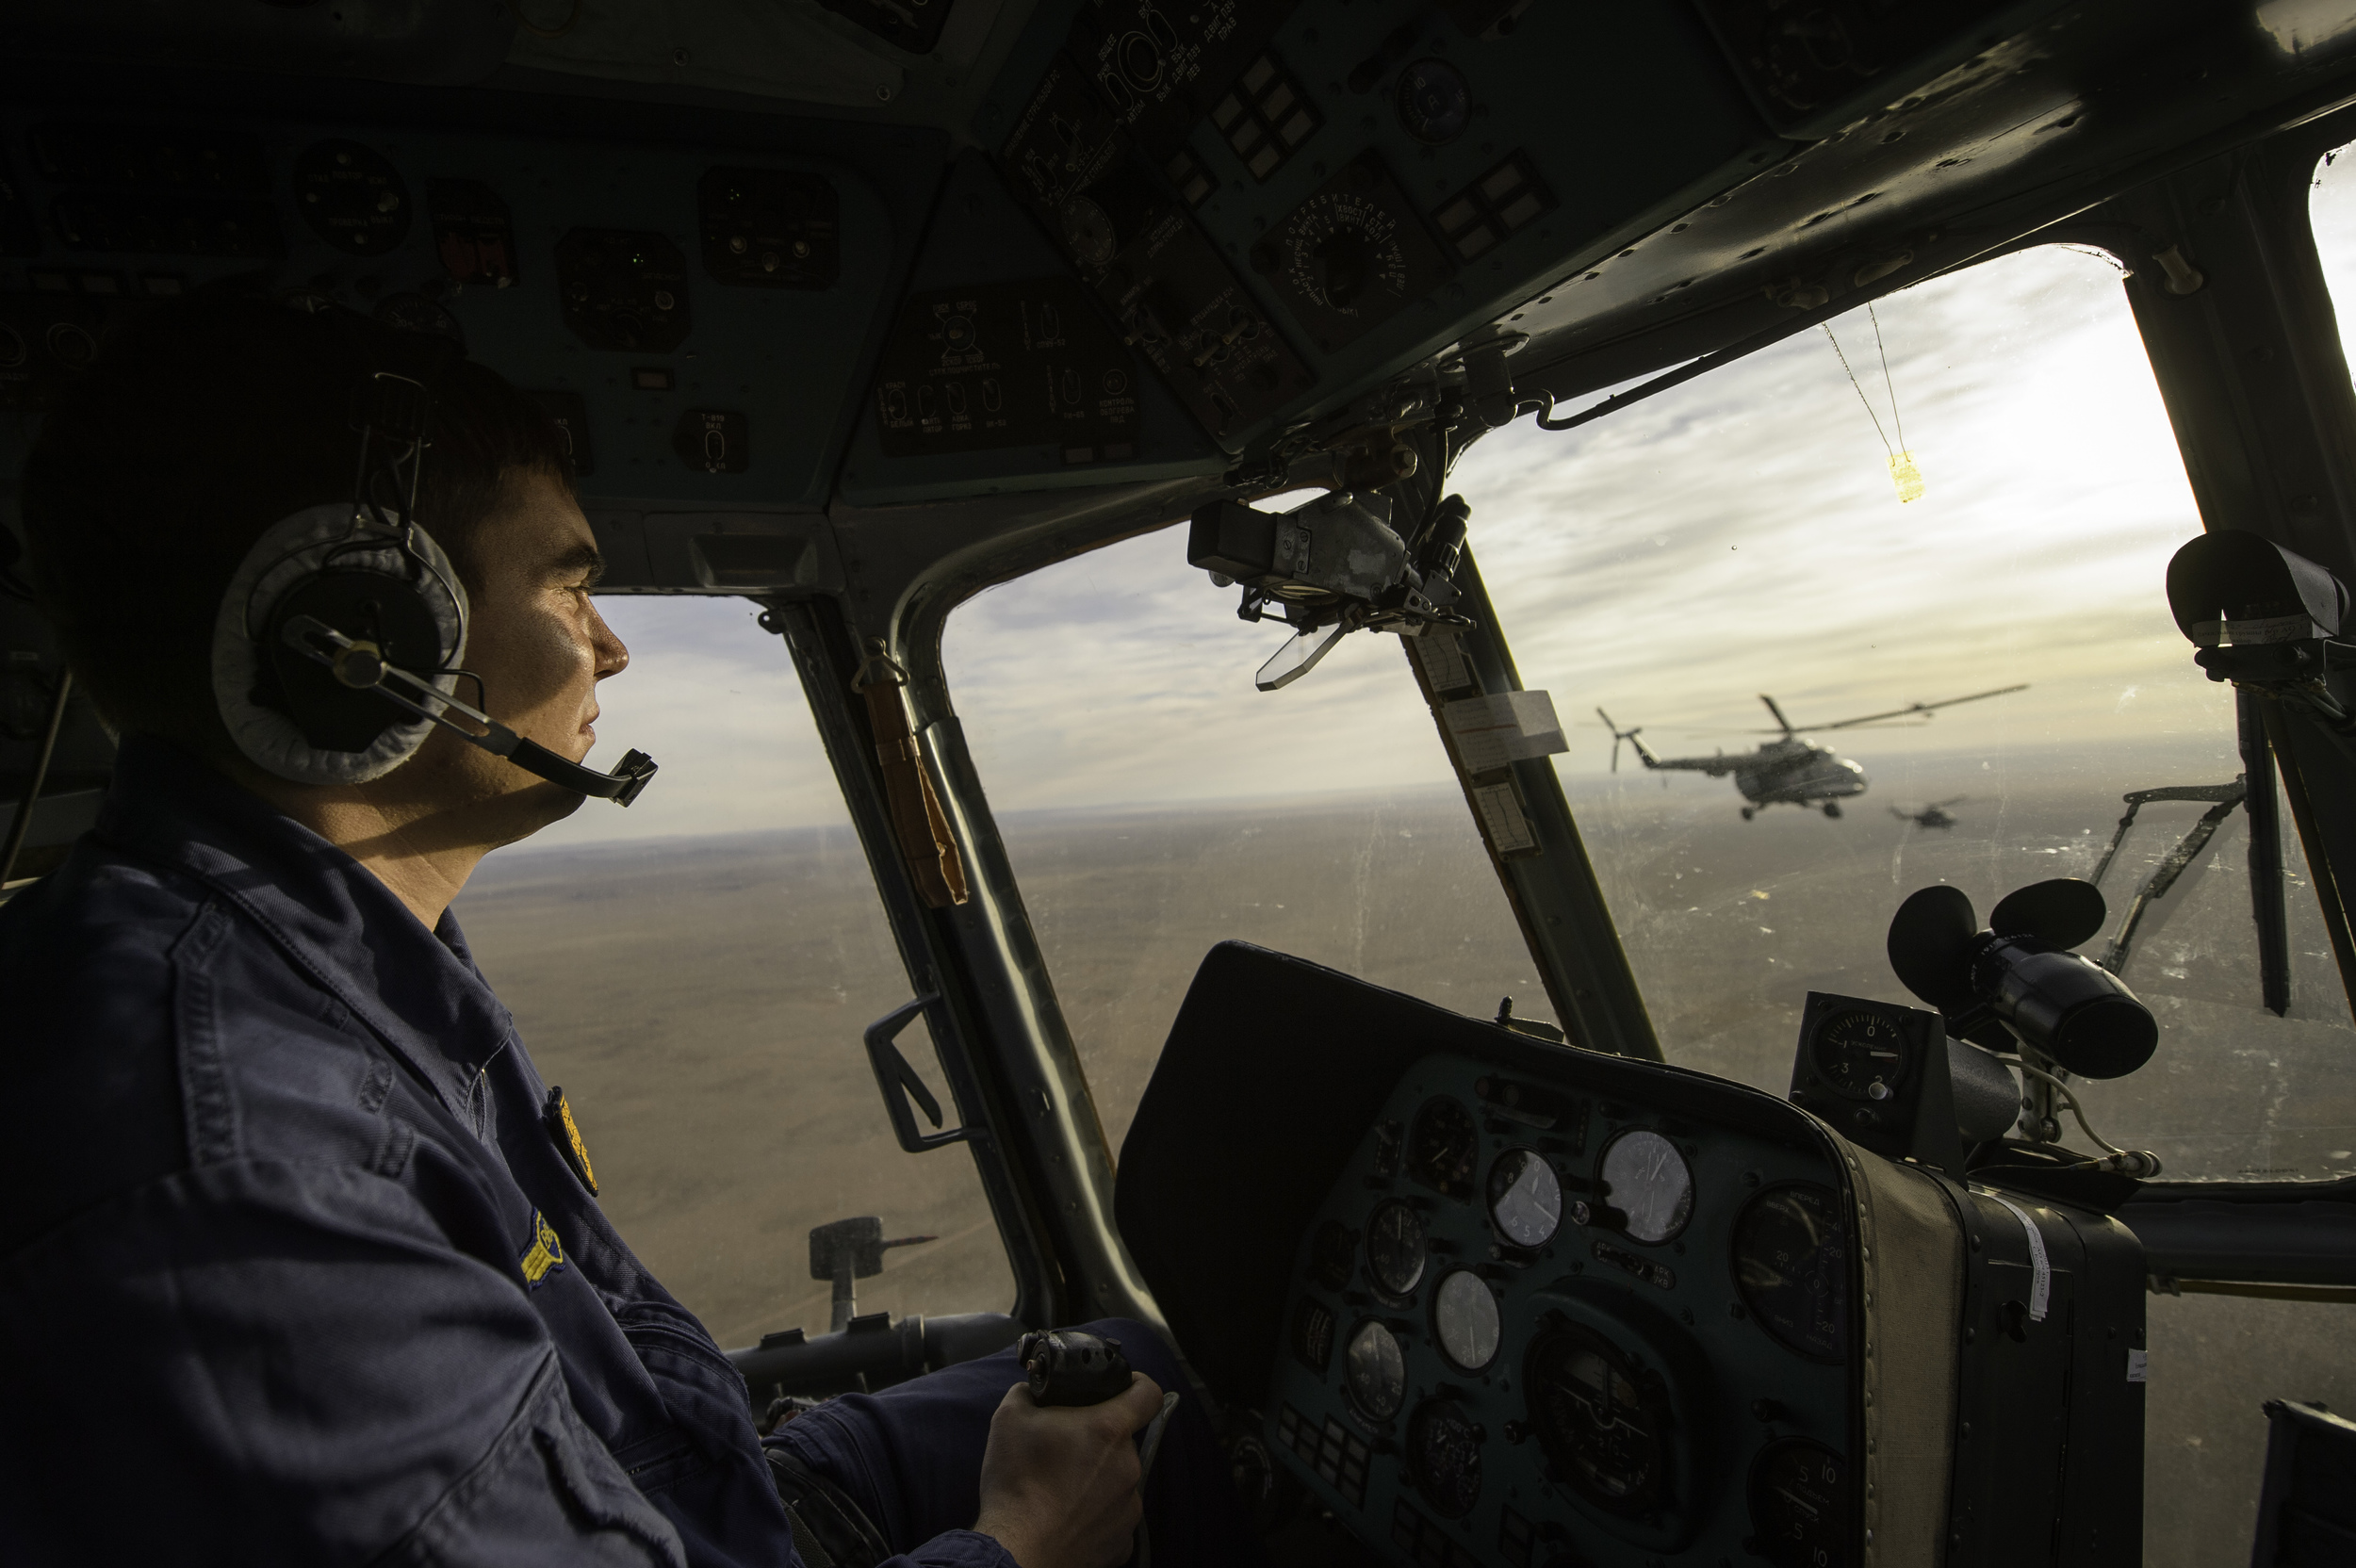  A Russian search and rescue helicopter co-pilot is seen in the cockpit of his helicopter en route to Zhezkazgan airport in Kazakhstan, Sunday, Nov. 10, 2013, a day ahead of the scheduled landing of the Soyuz TMA-09M spacecraft with Expedition 37 Com